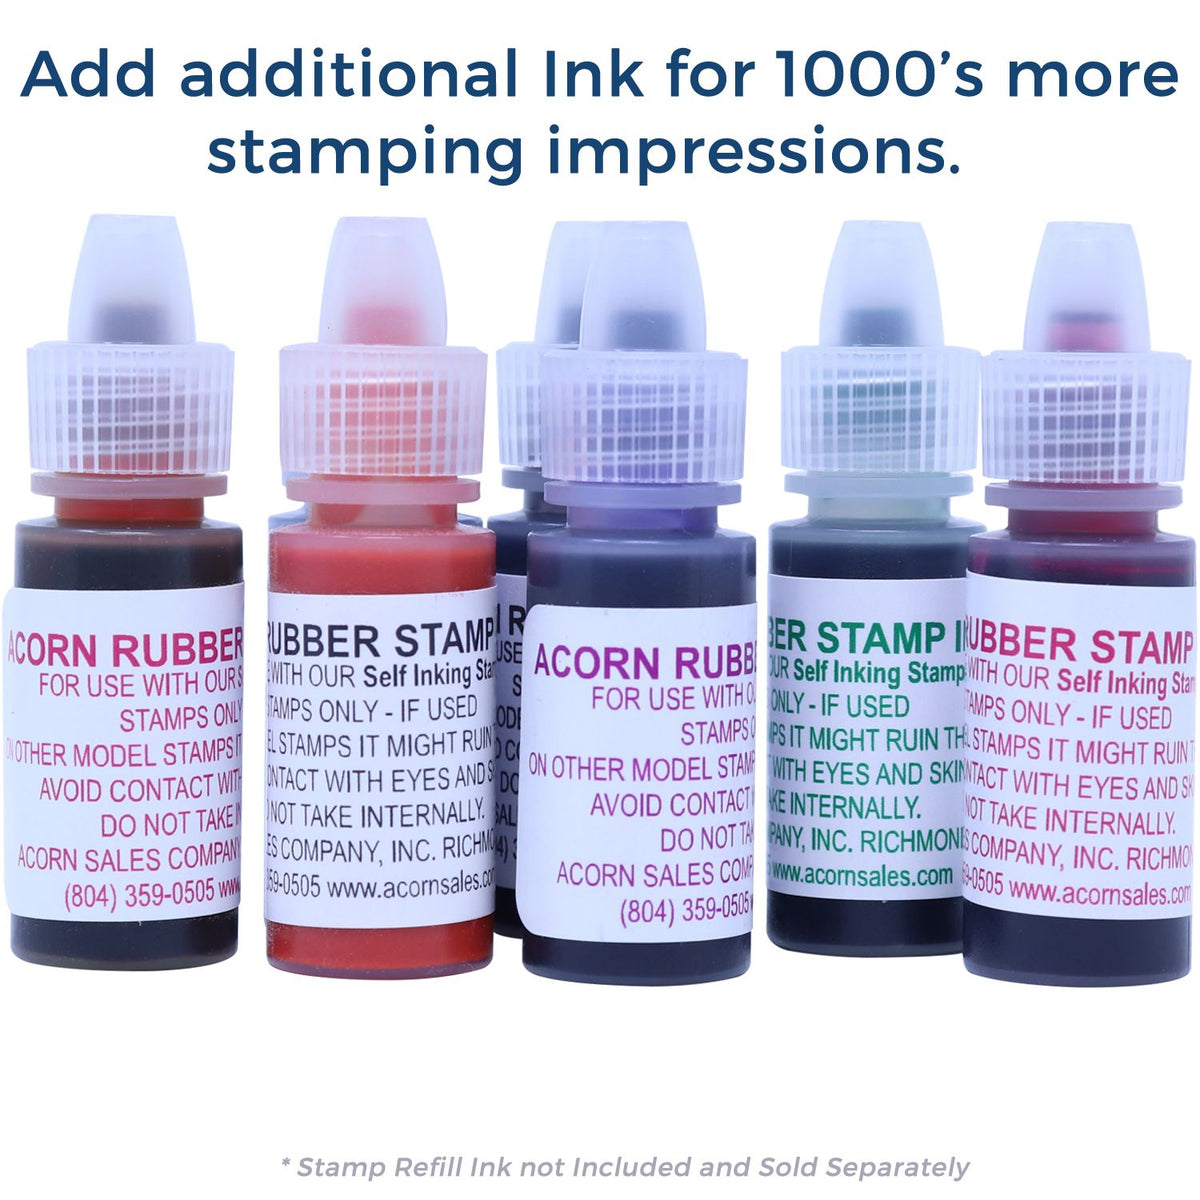 Refill Ink for Self-Inking Round Recycle Stamp Available